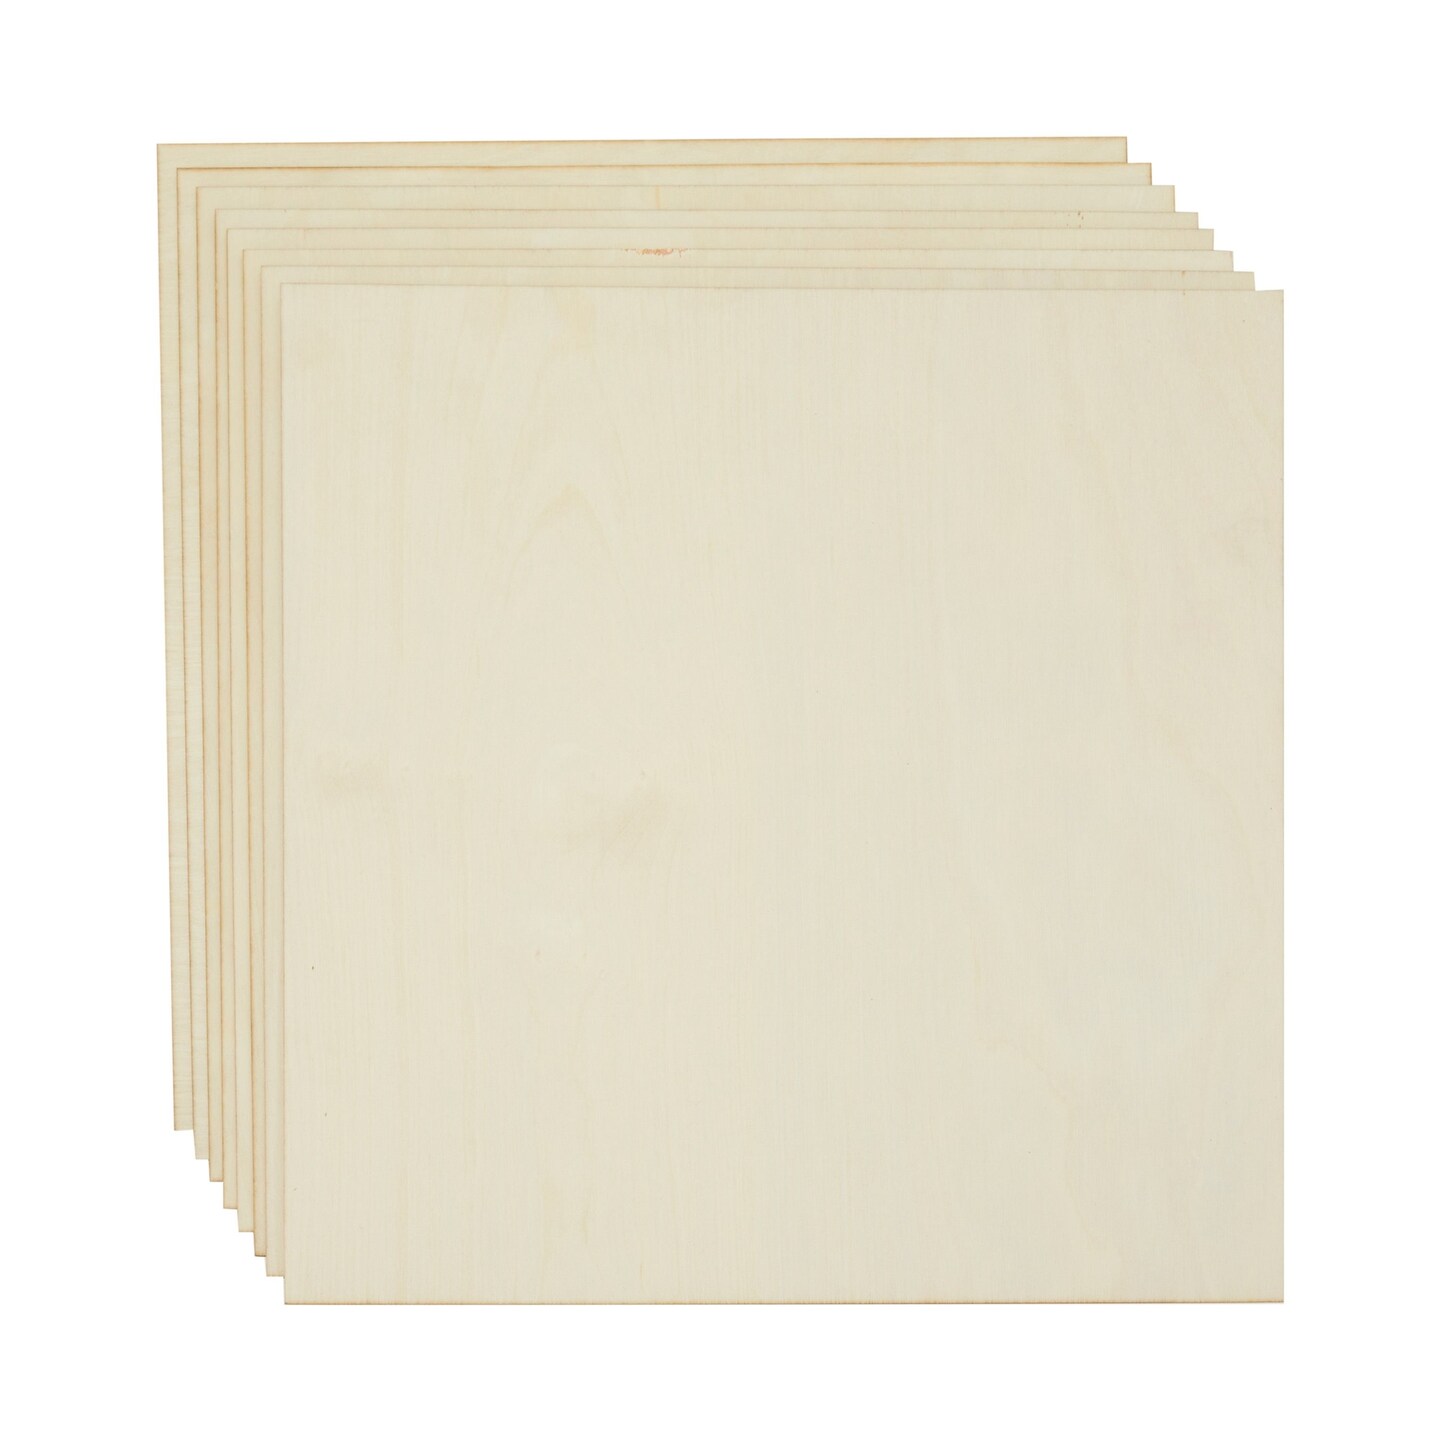 12x12 Wood Panels, Unfinished 3mm Birch Plywood Sheets (8 Pack)